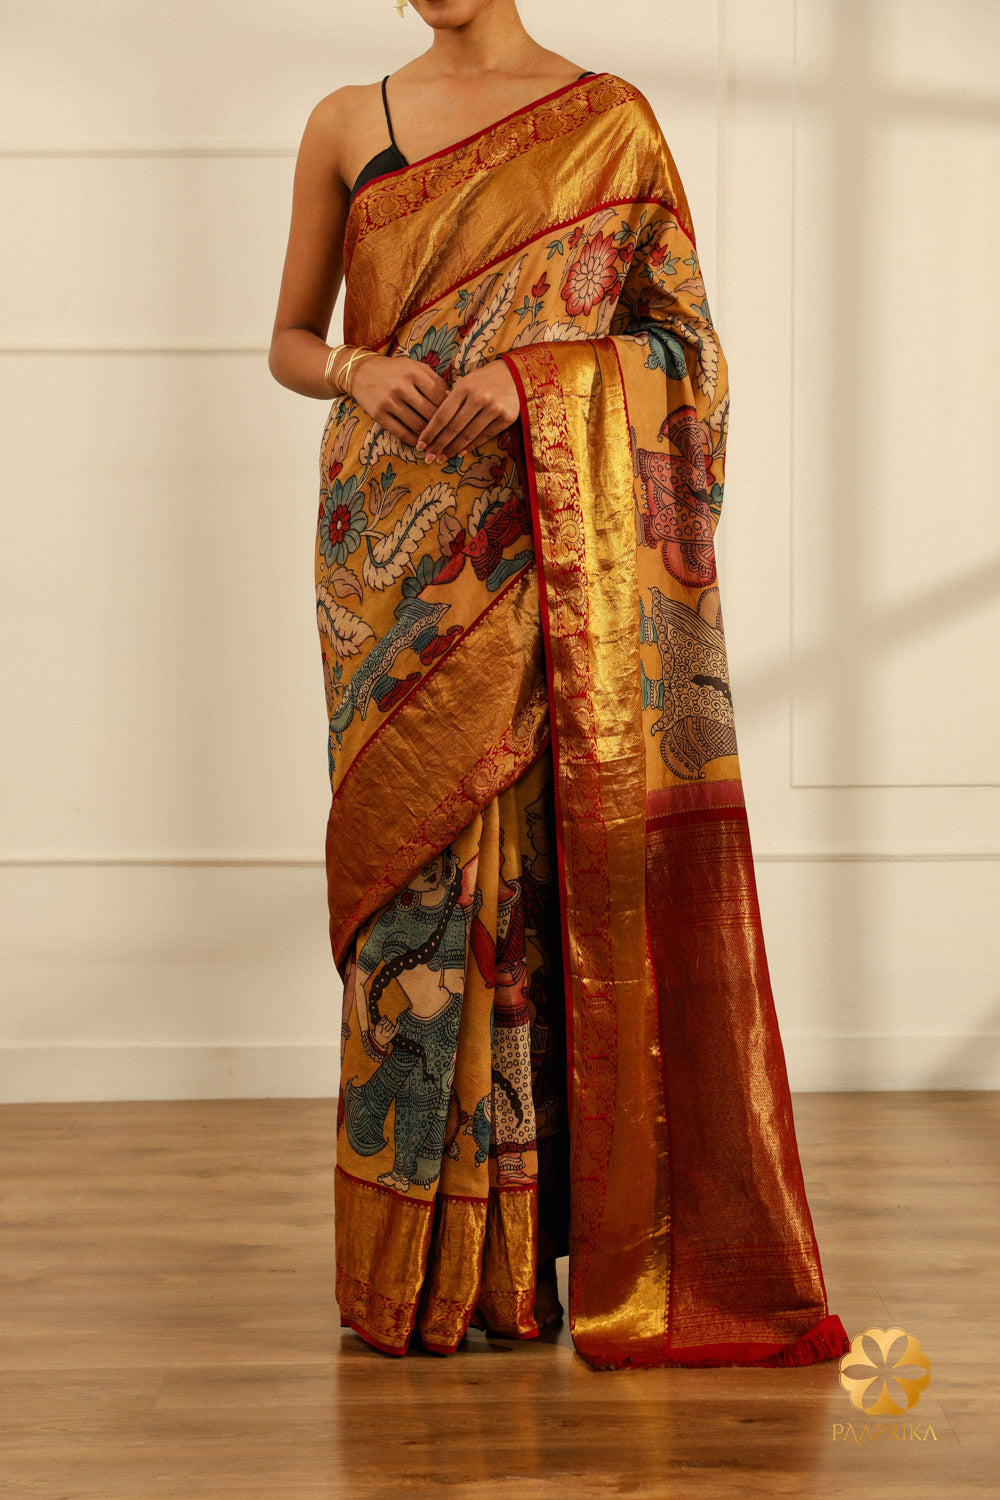  The saree elegantly displayed on a mannequin, capturing the beauty of the Kalamkari design and the silk's sheen.